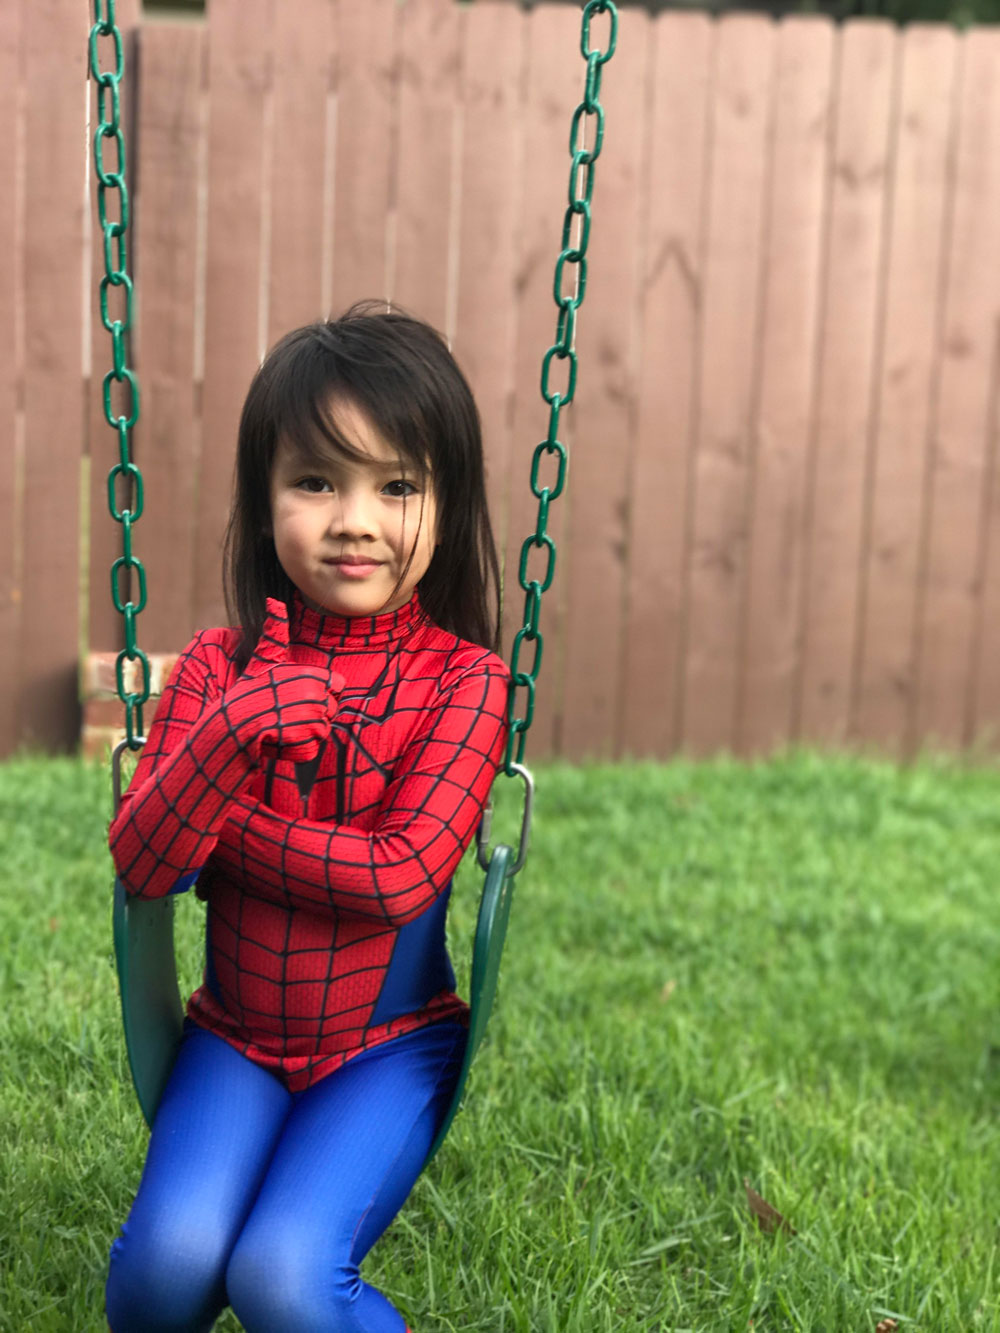 My daughter pulls off spider-man so well